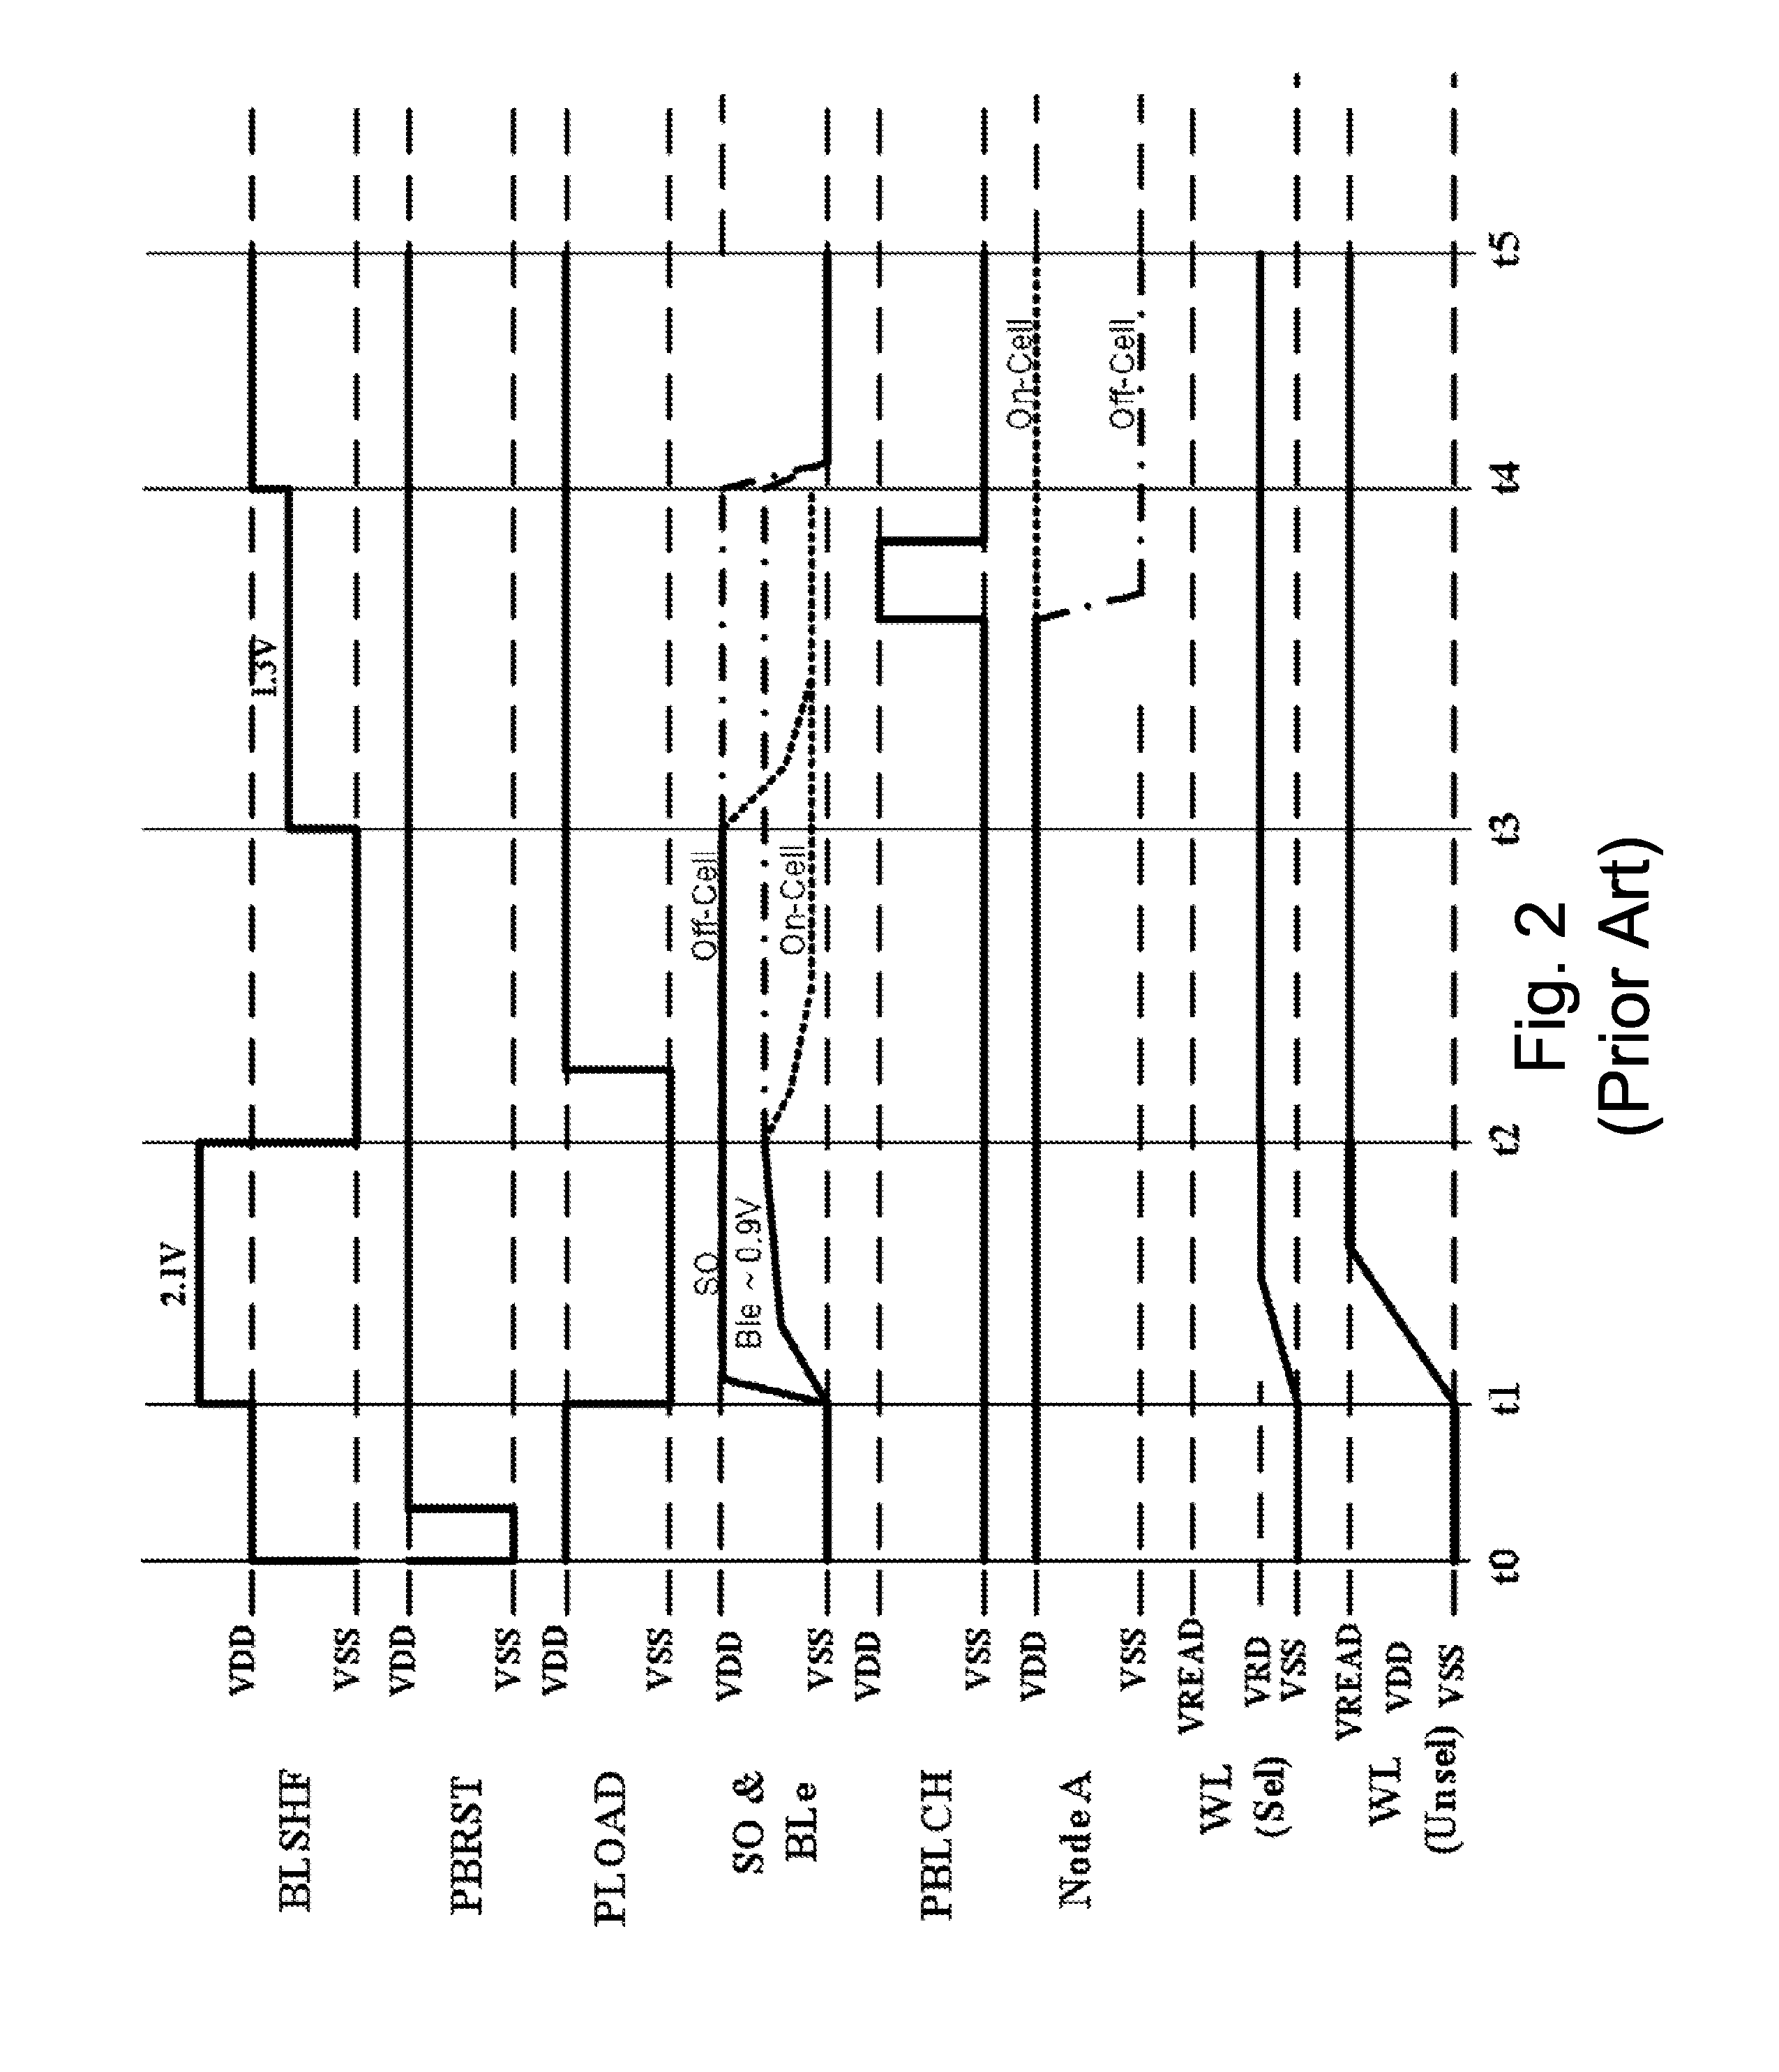 Novel NAND array architecture for multiple simutaneous program and read